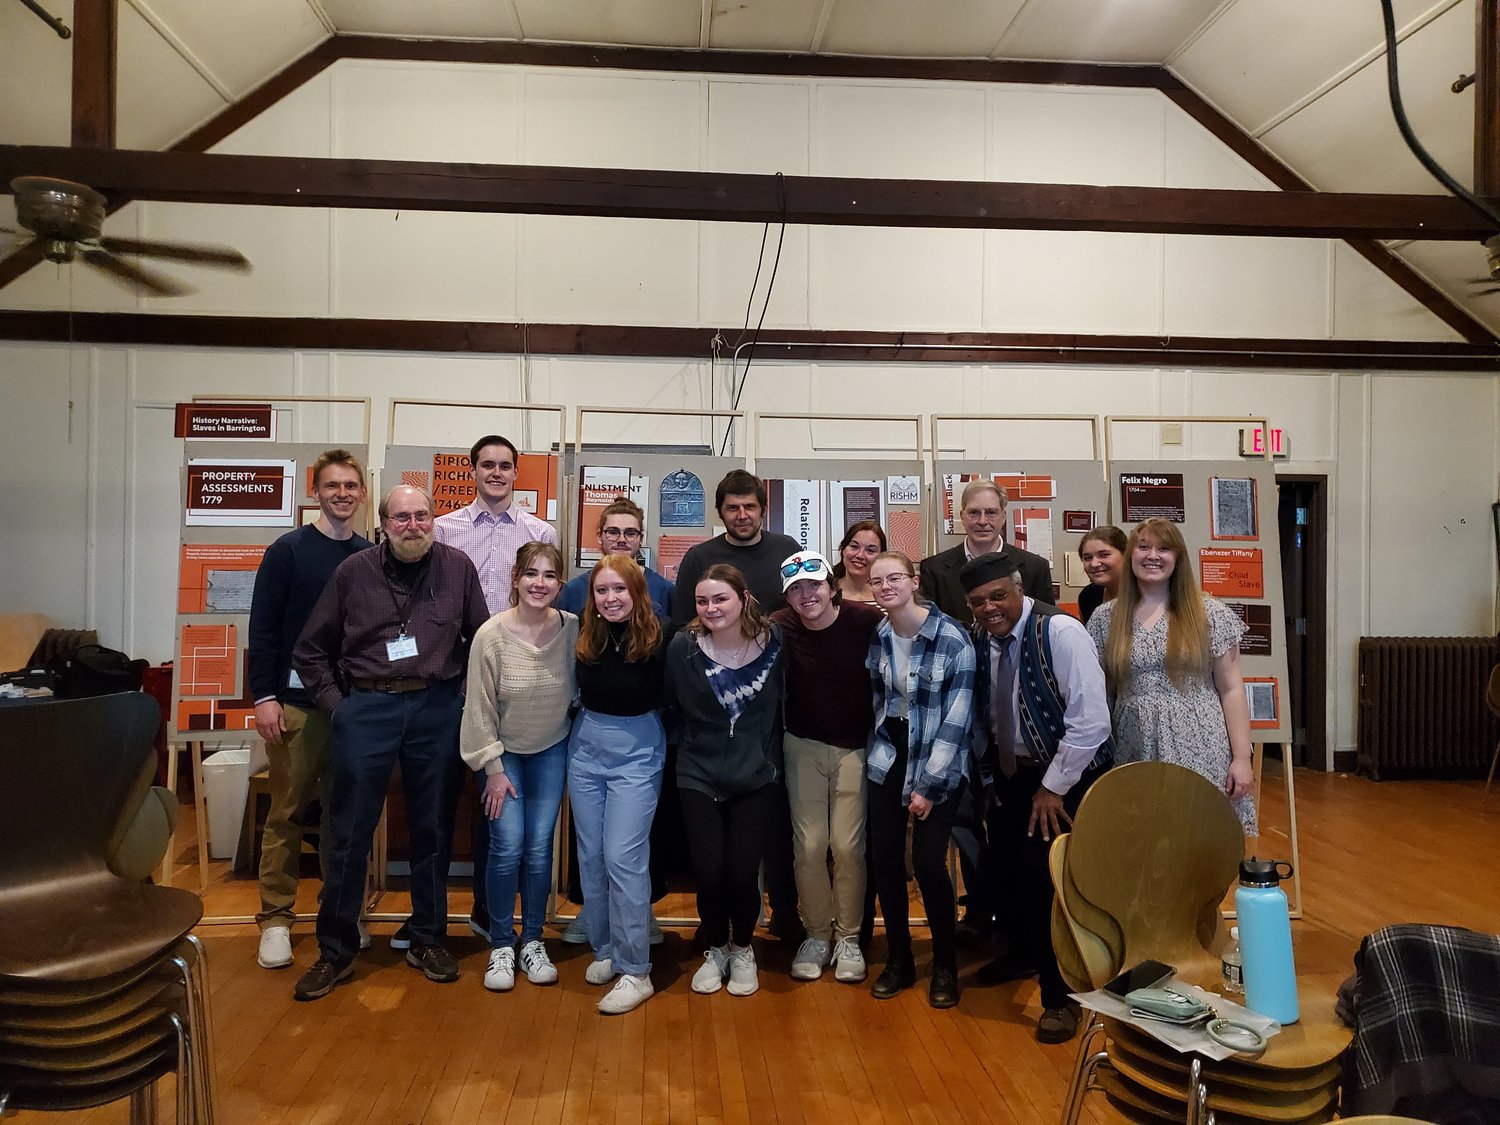 Students shared their discoveries about Barrington’s slave history during a recent presentation at the Bay Spring Community Center. The research will also be used for a RI Slave History Medallion installation in Barrington.